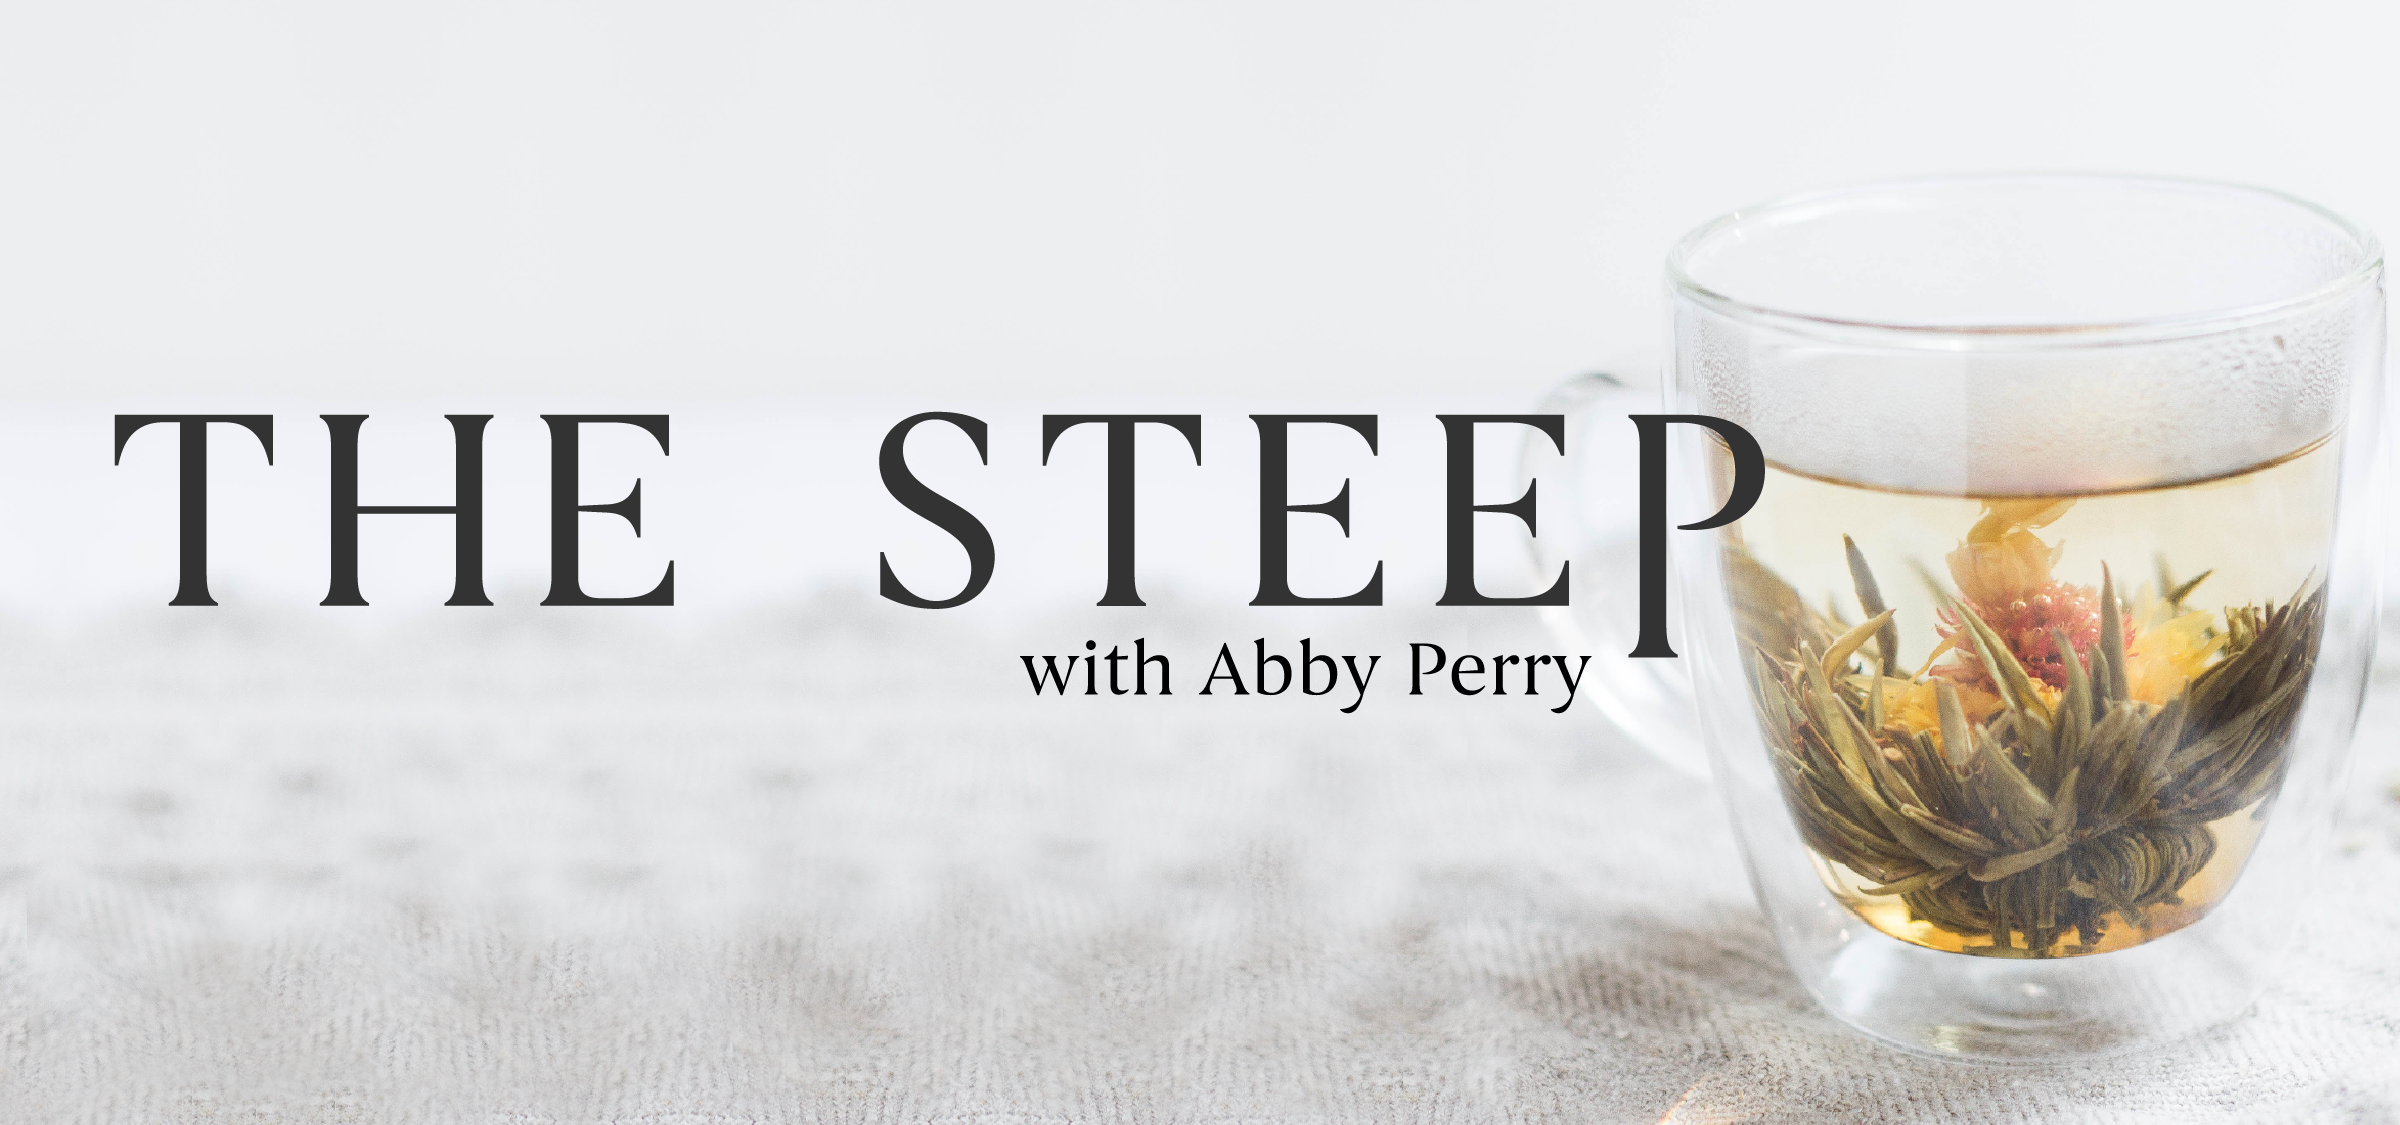 The Steep: A new column by Abby Perry